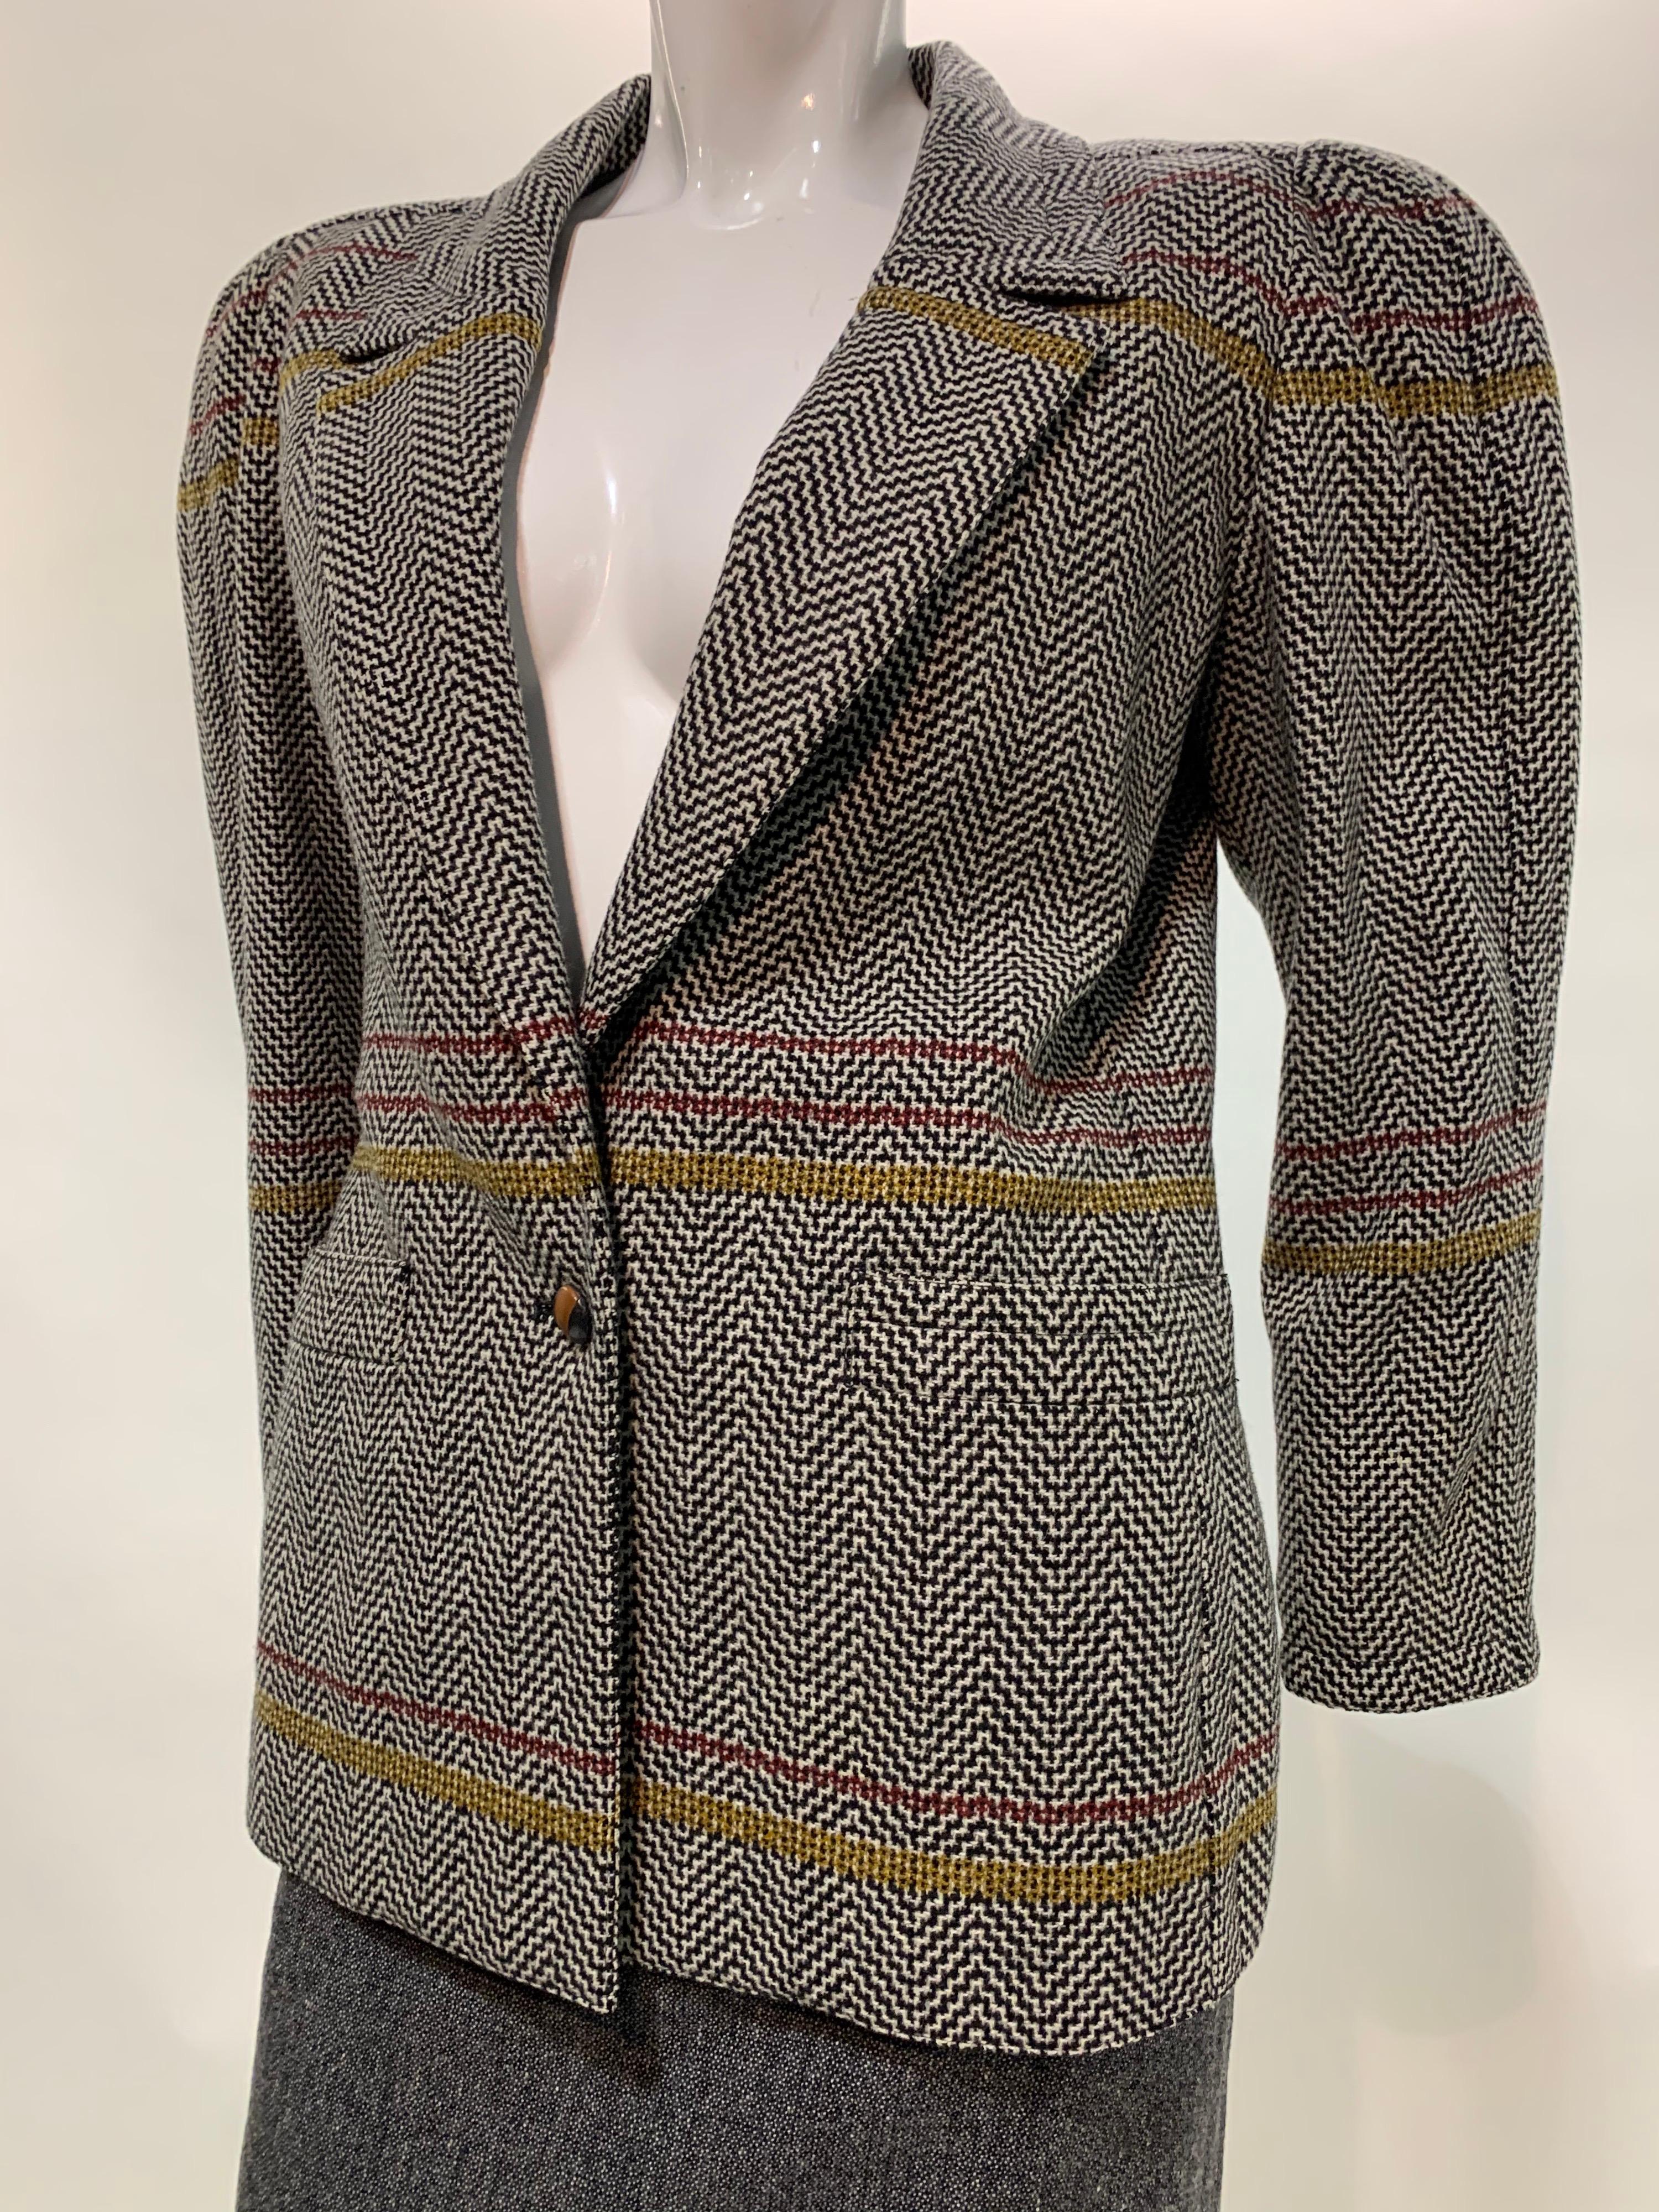 Black 1980 Gianni Versace Mixed Tweed Skirt Suit w/ Structured Shoulder Silhouette For Sale